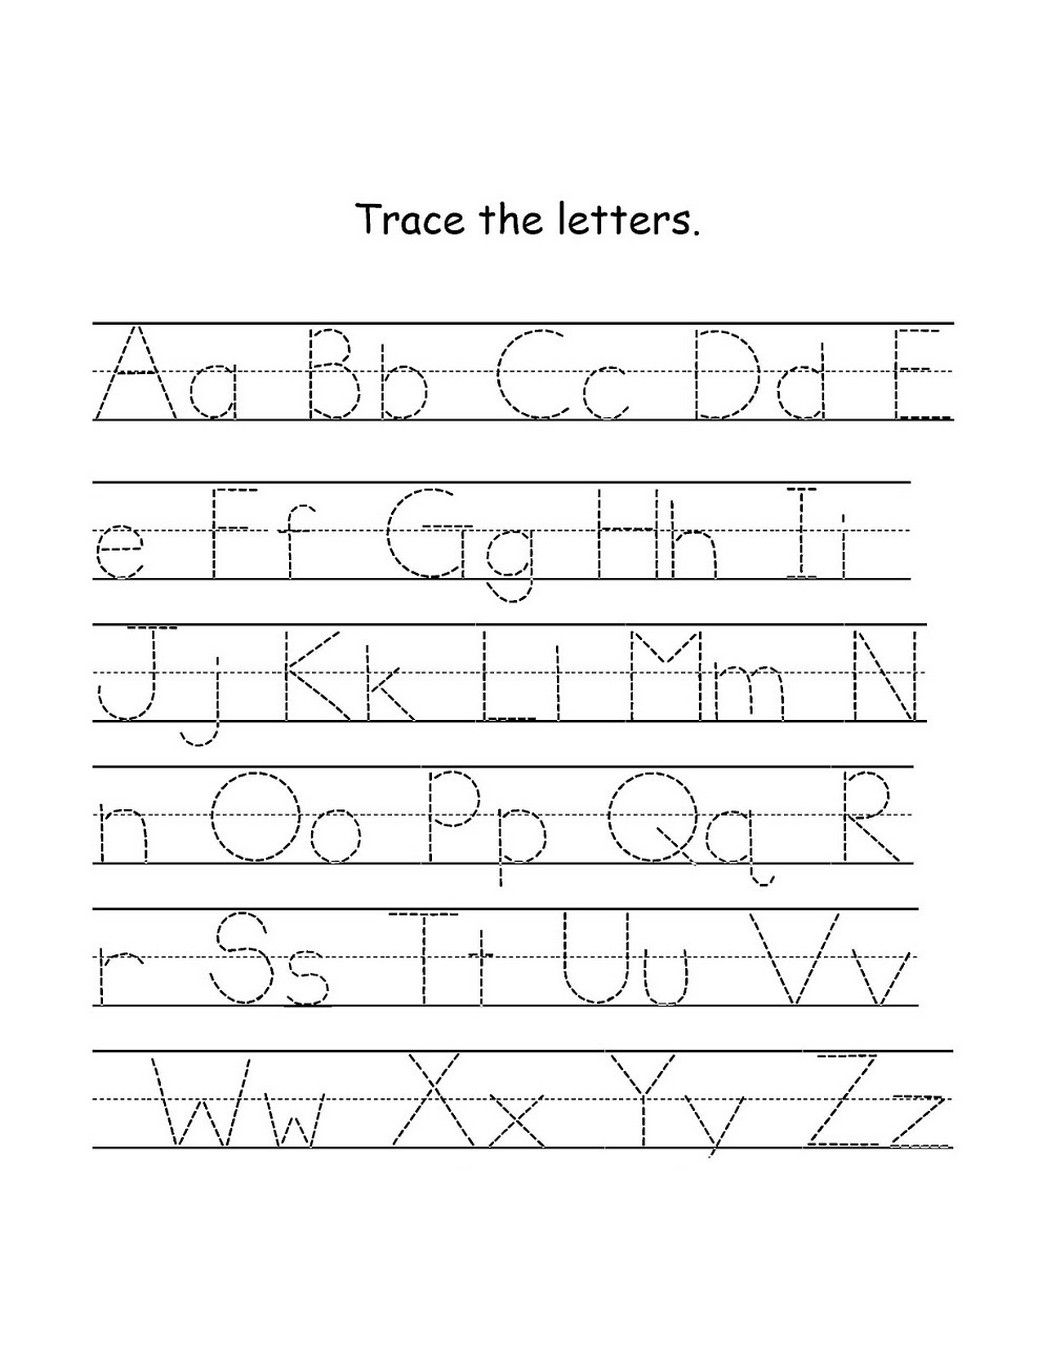 tracing letters a-z worksheets easy